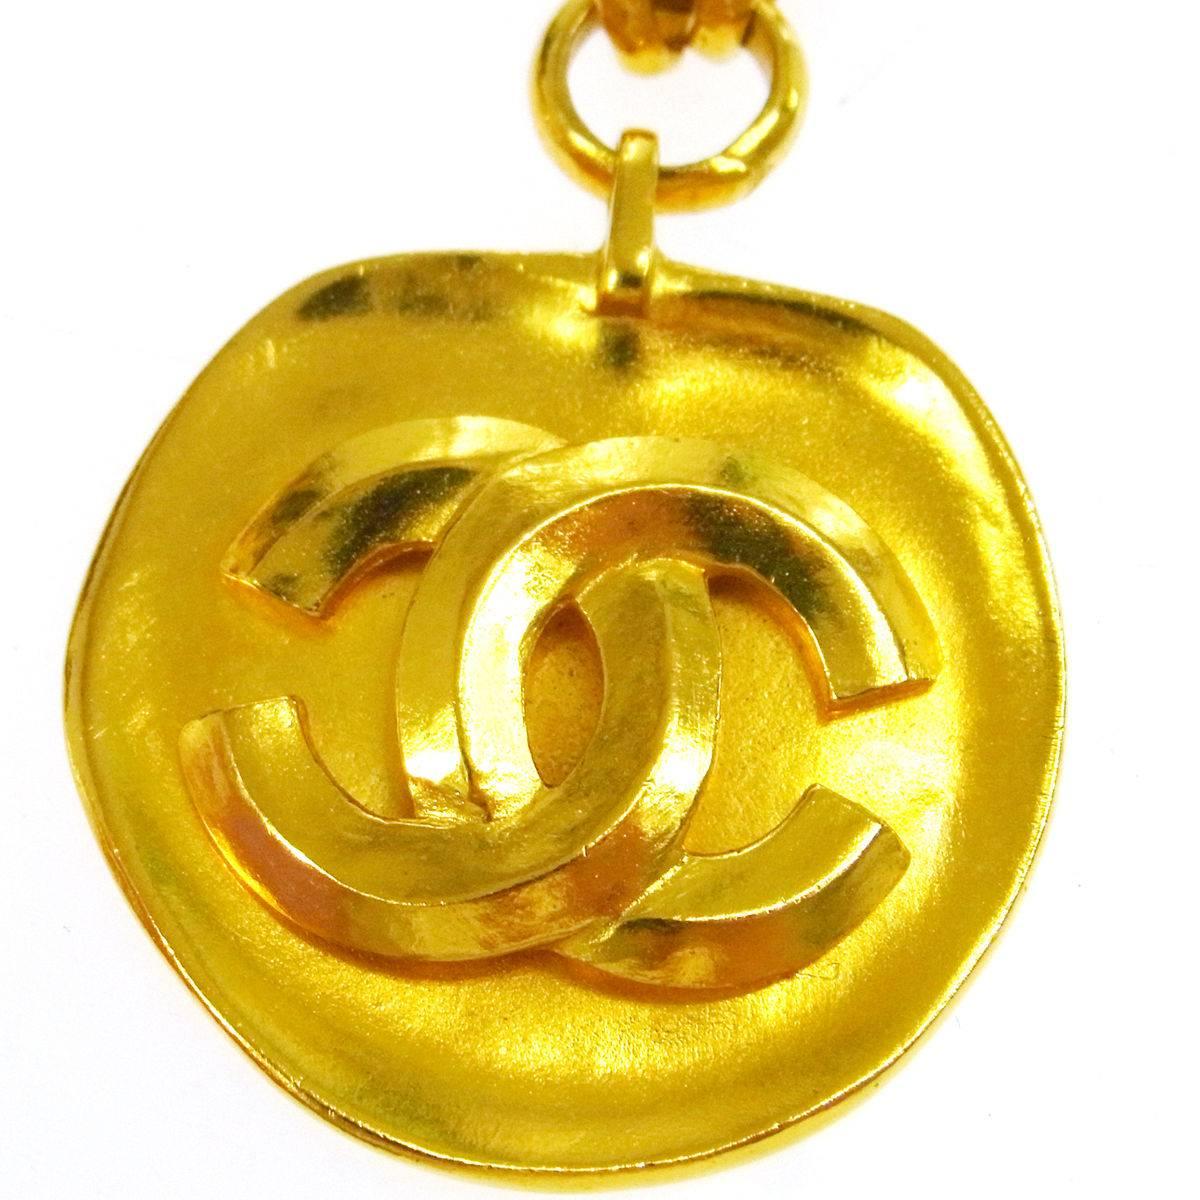 CURATOR'S NOTES

Chanel Gold Charm Chain Link Drape Drop Evening Necklace 

Metal
Gold tone
Hook closure
Made in France
Charm diameter 1.5"
Chain length 25.5"